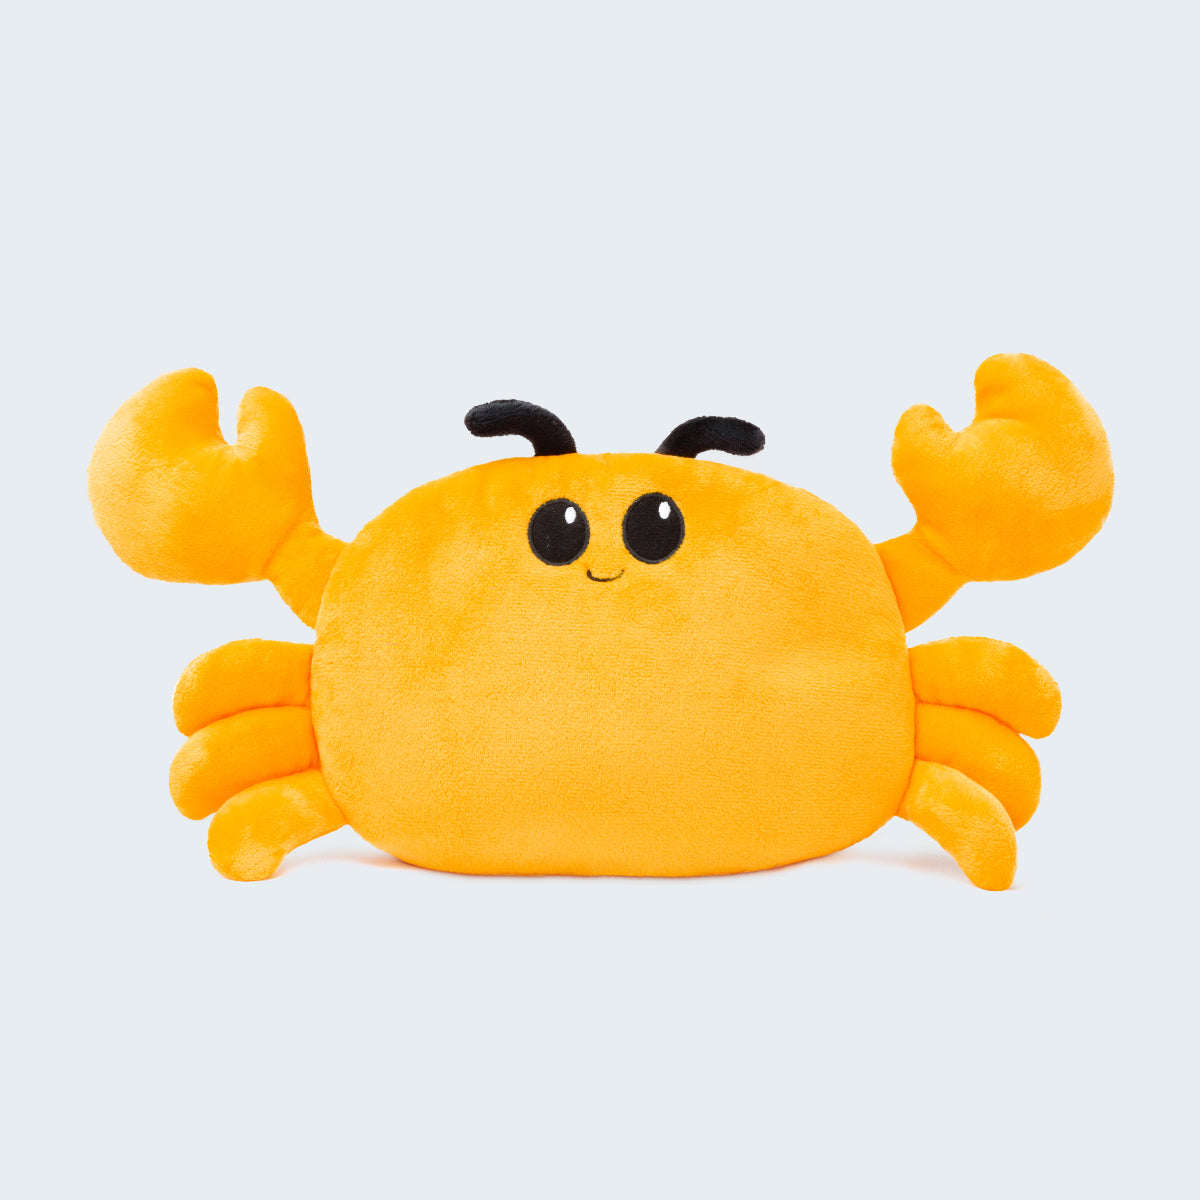 Menstruation Crustacean Crab: Microwaveable Heating Pad for Period Cramps & Muscle Pain